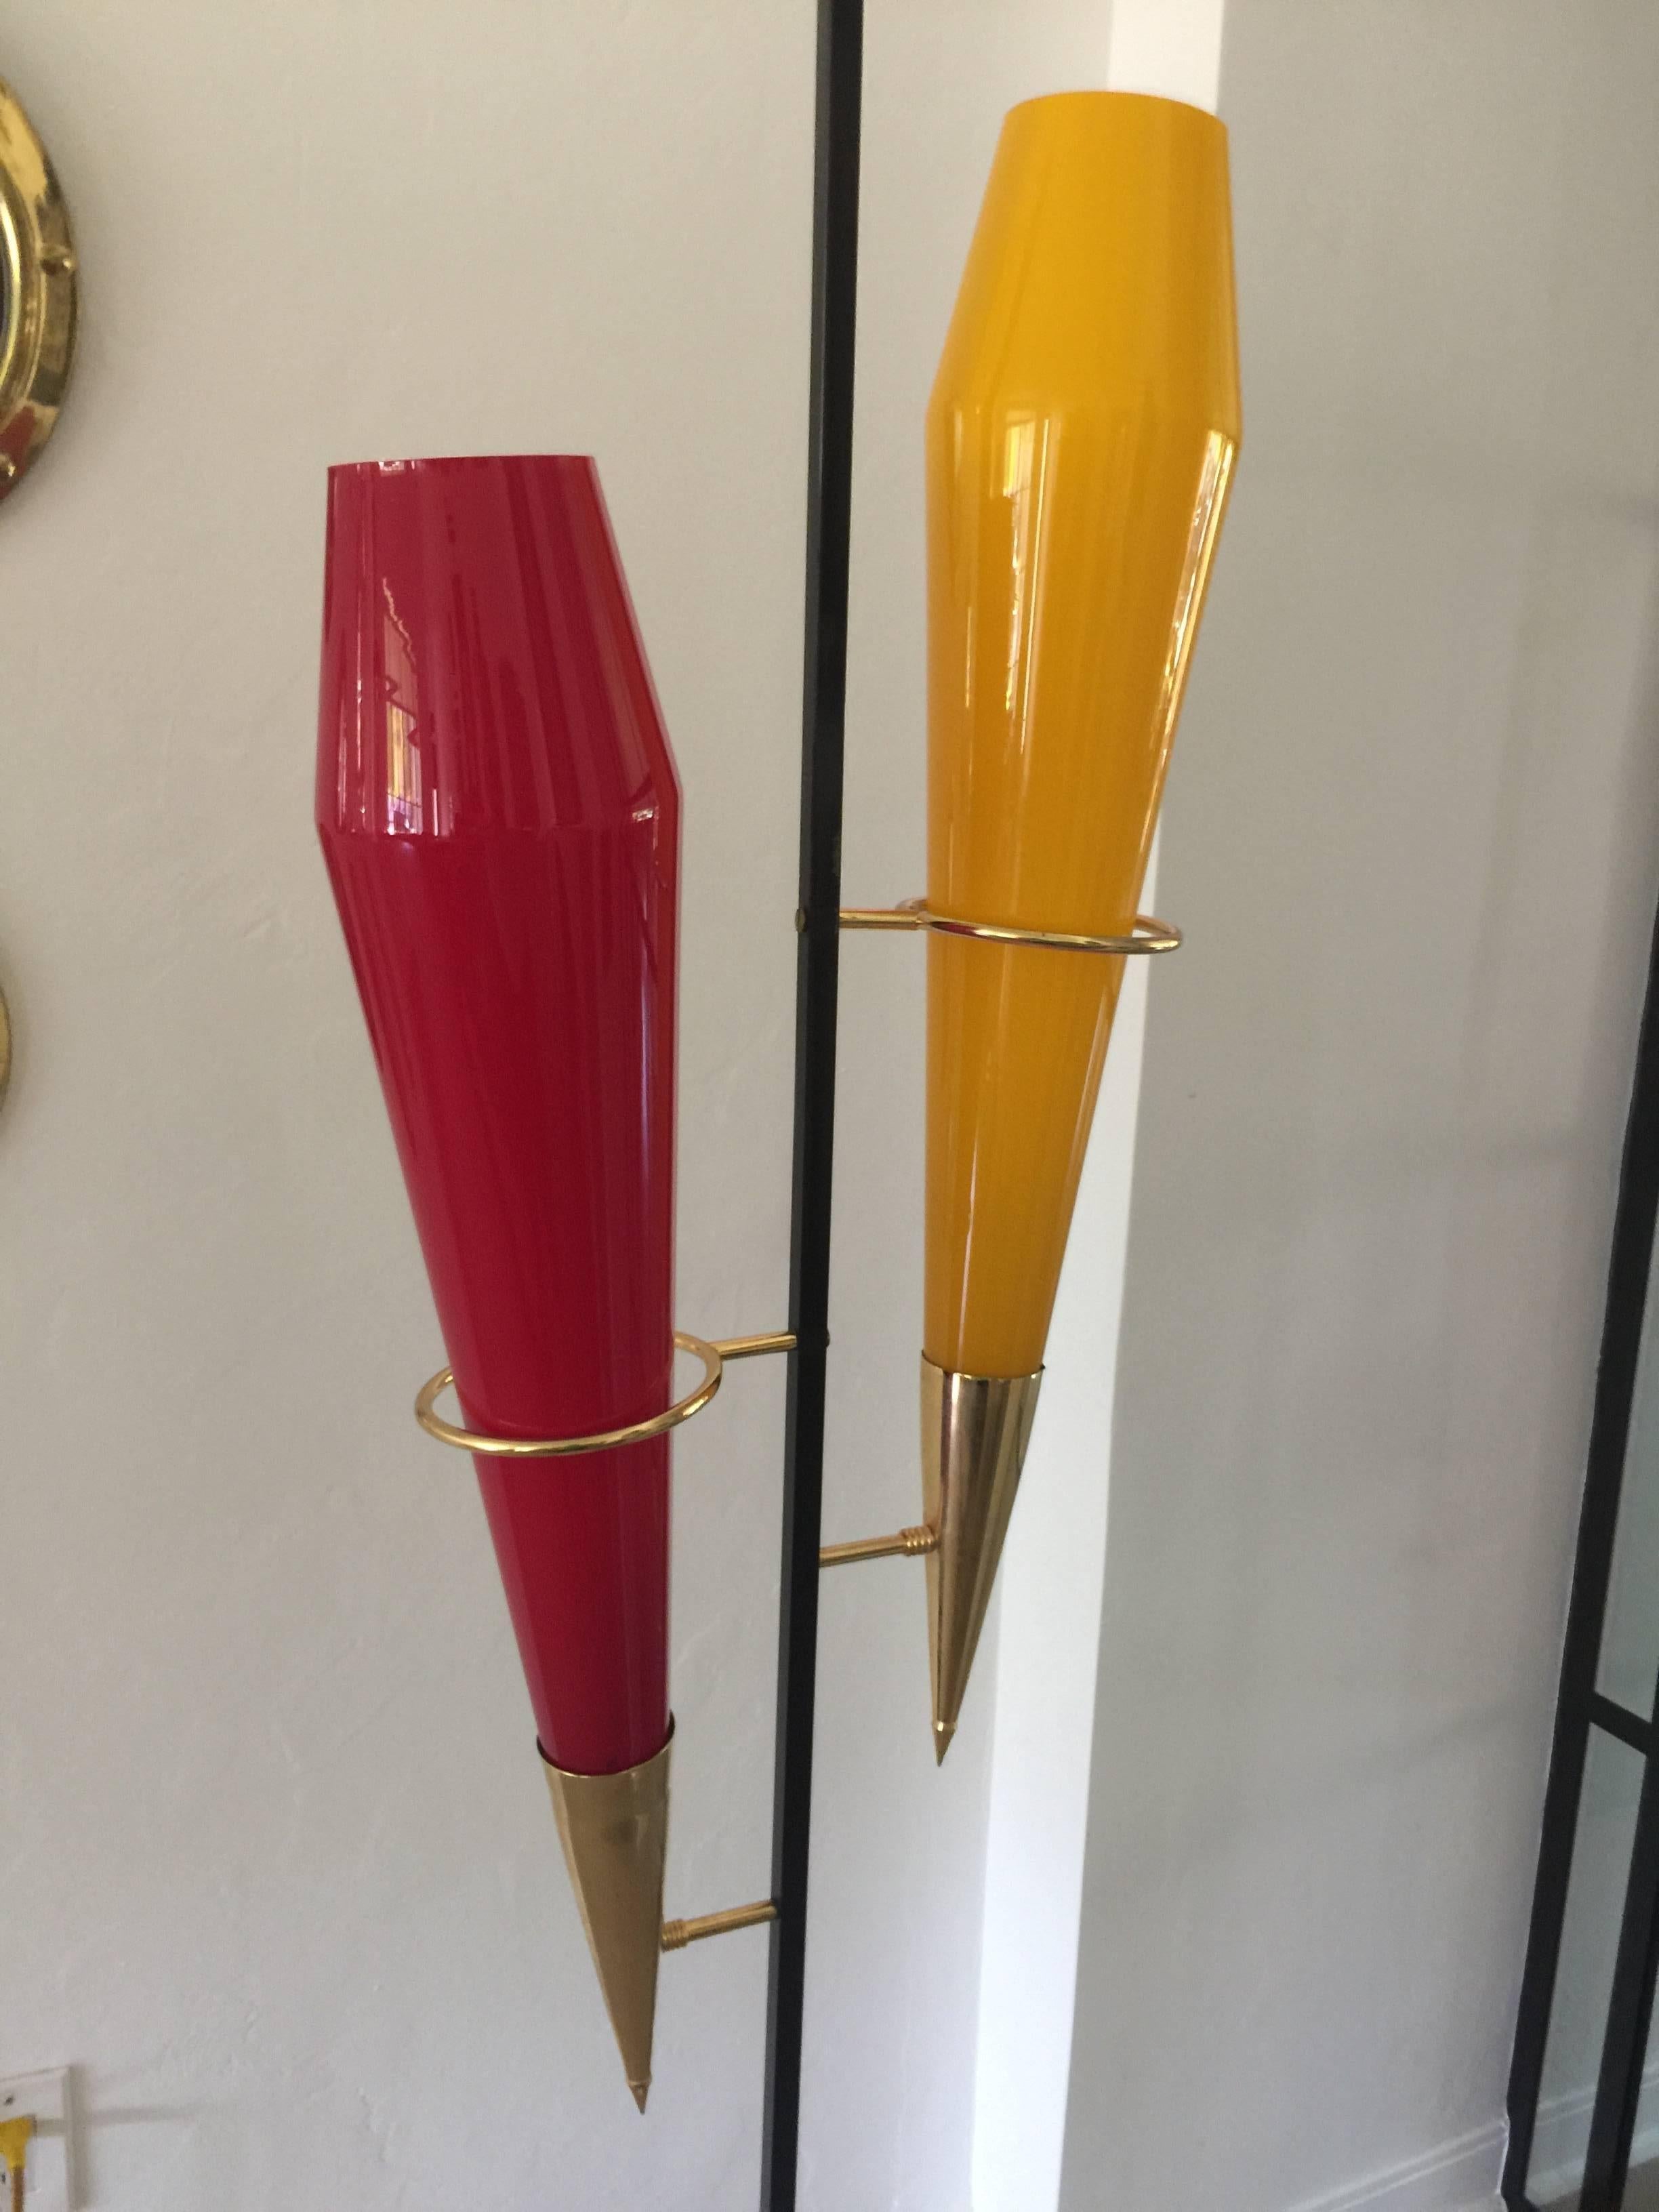 Very Italian floor lamp by Stilnovo with vibrant yellow and red over-sized conical difusers made by Vistosi Murano glass makers (brass rings, brass cones and marble base).